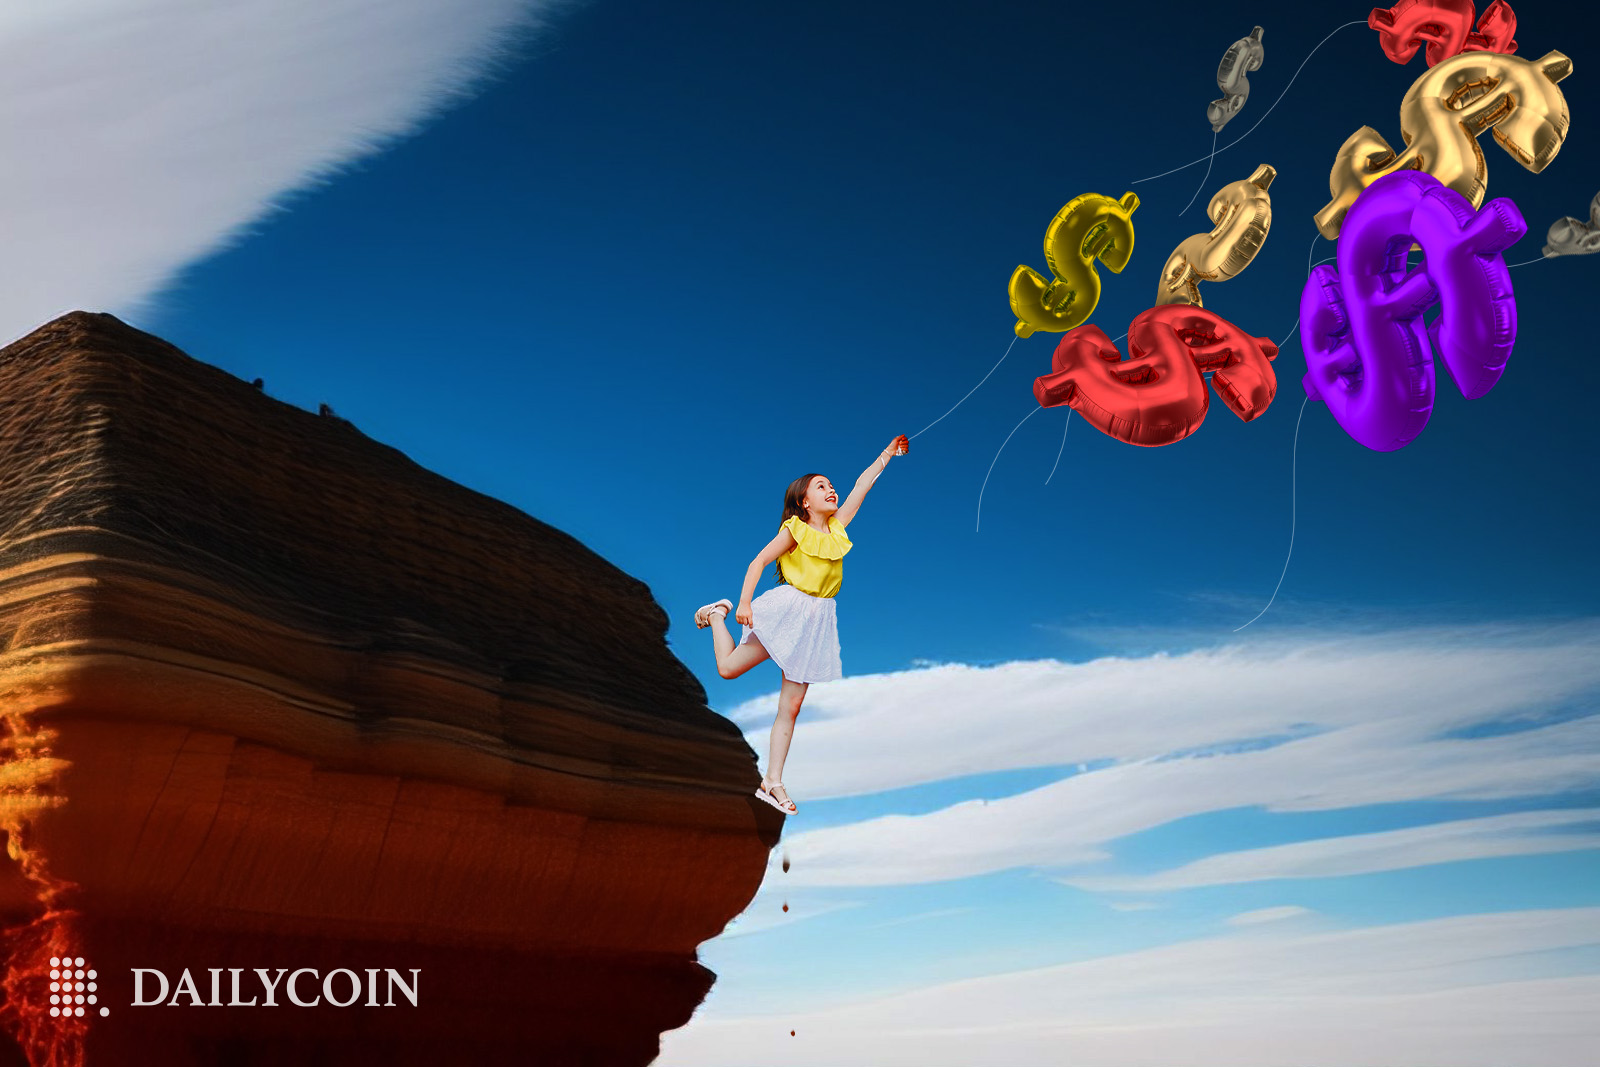 A woman flying off a cliff holding colorful dollar sign balloons.